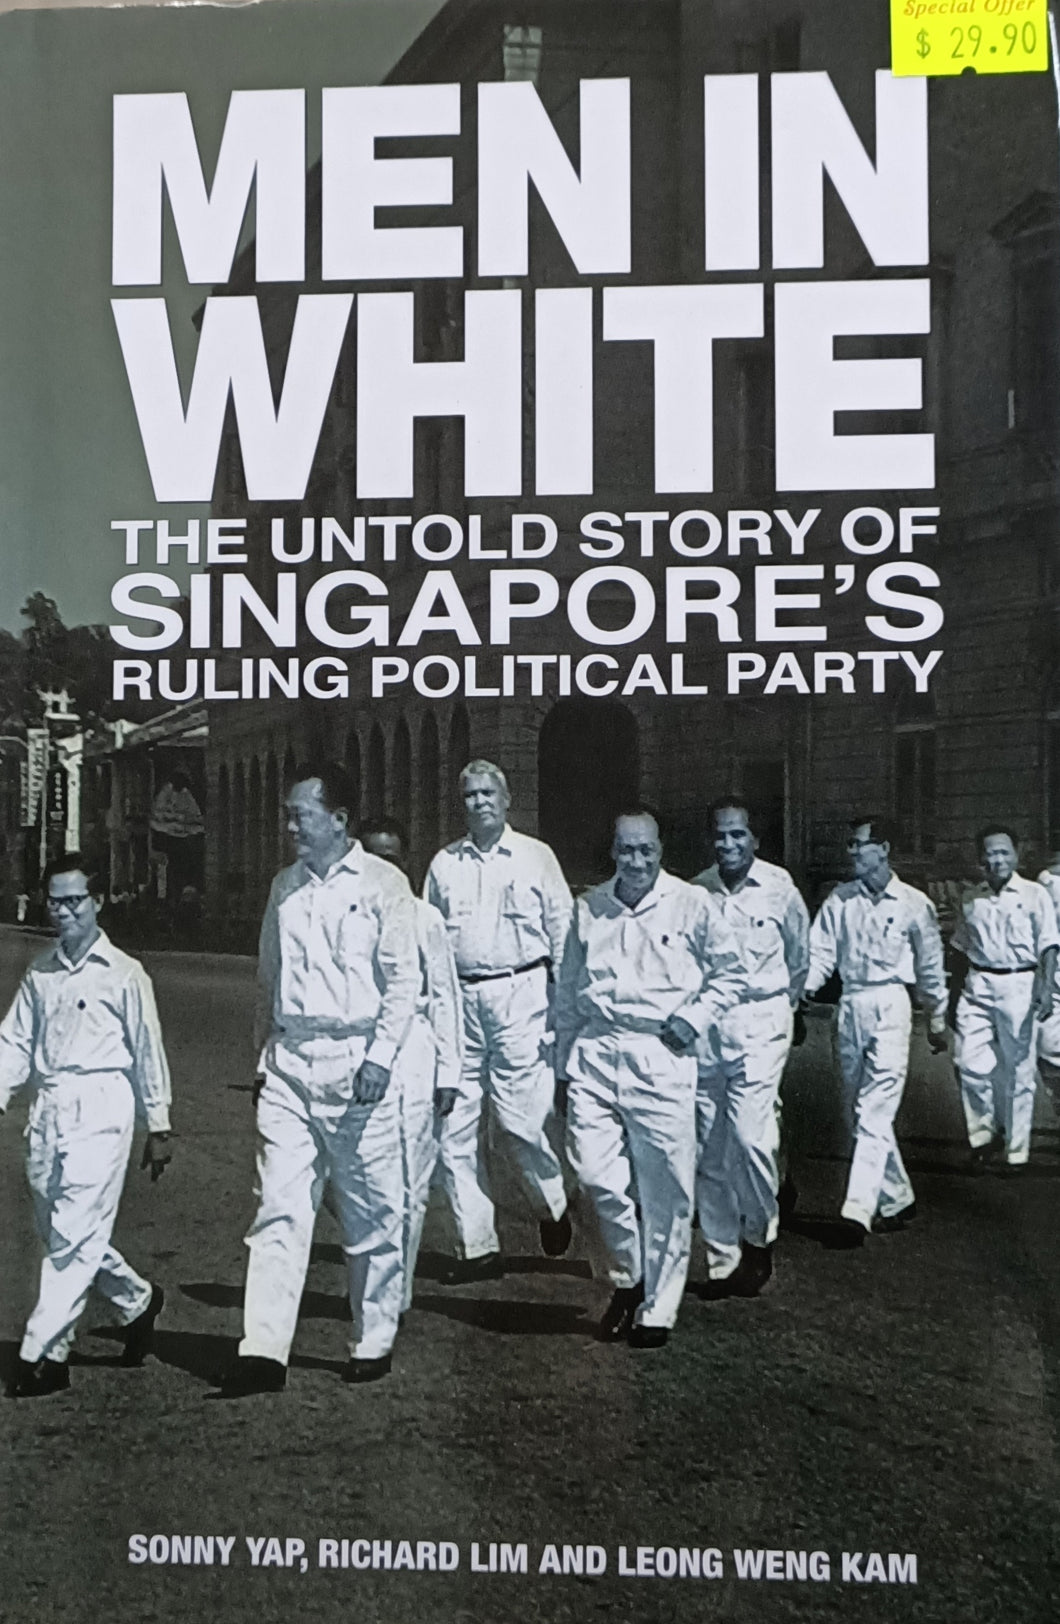 Men In White: The Untold Story of Singapore's Ruling Political Party - Sonny Yap, Richard Lim, Leong Weng Kam